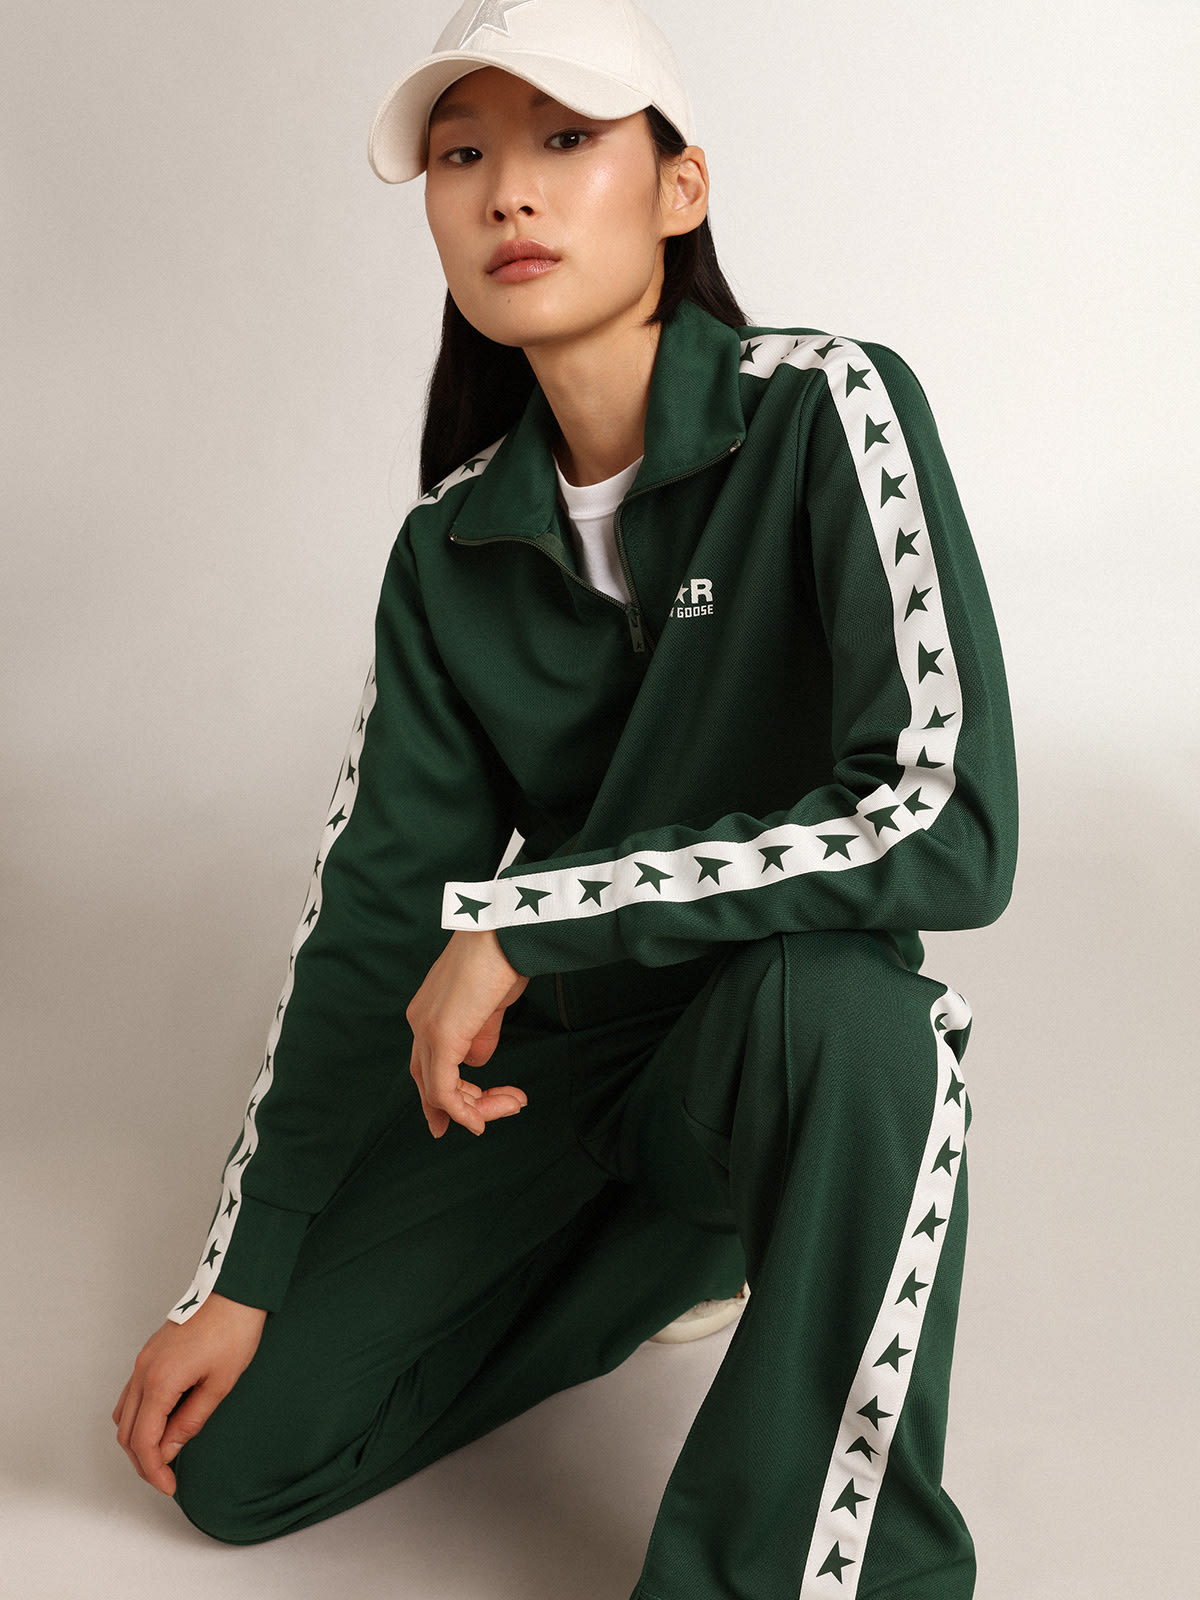 Golden Goose - Bright-green Denise Star Collection zipped sweatshirt with white strip and contrasting green stars in 